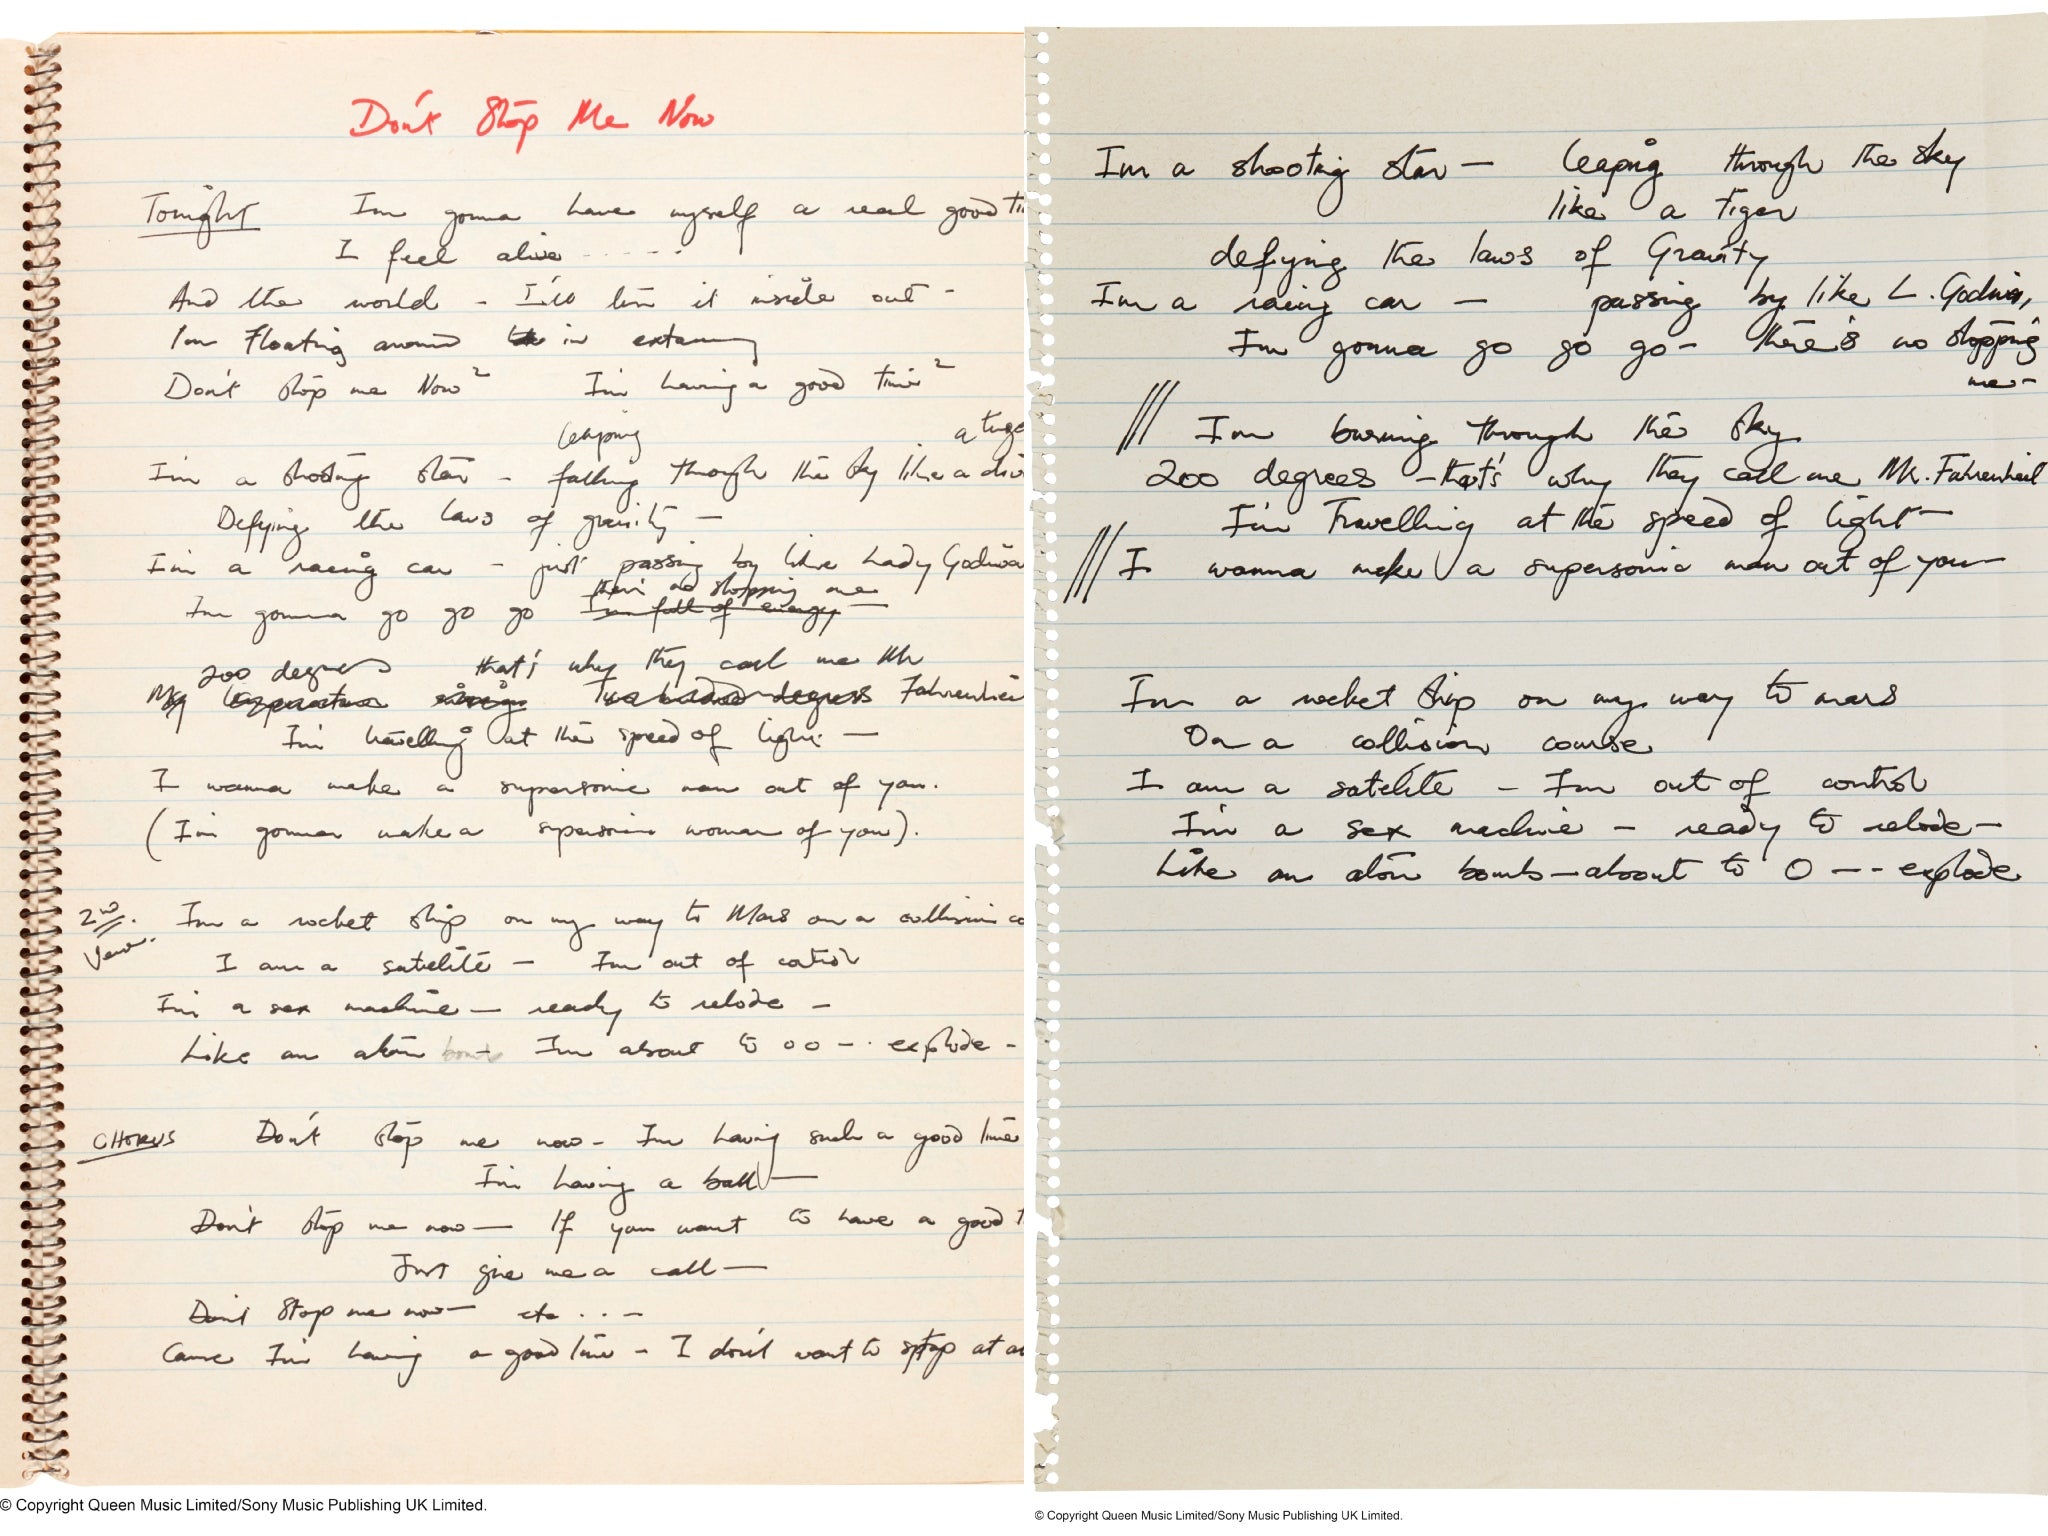 Lyrics to ‘Don’t Stop Me Now’ were auctioned